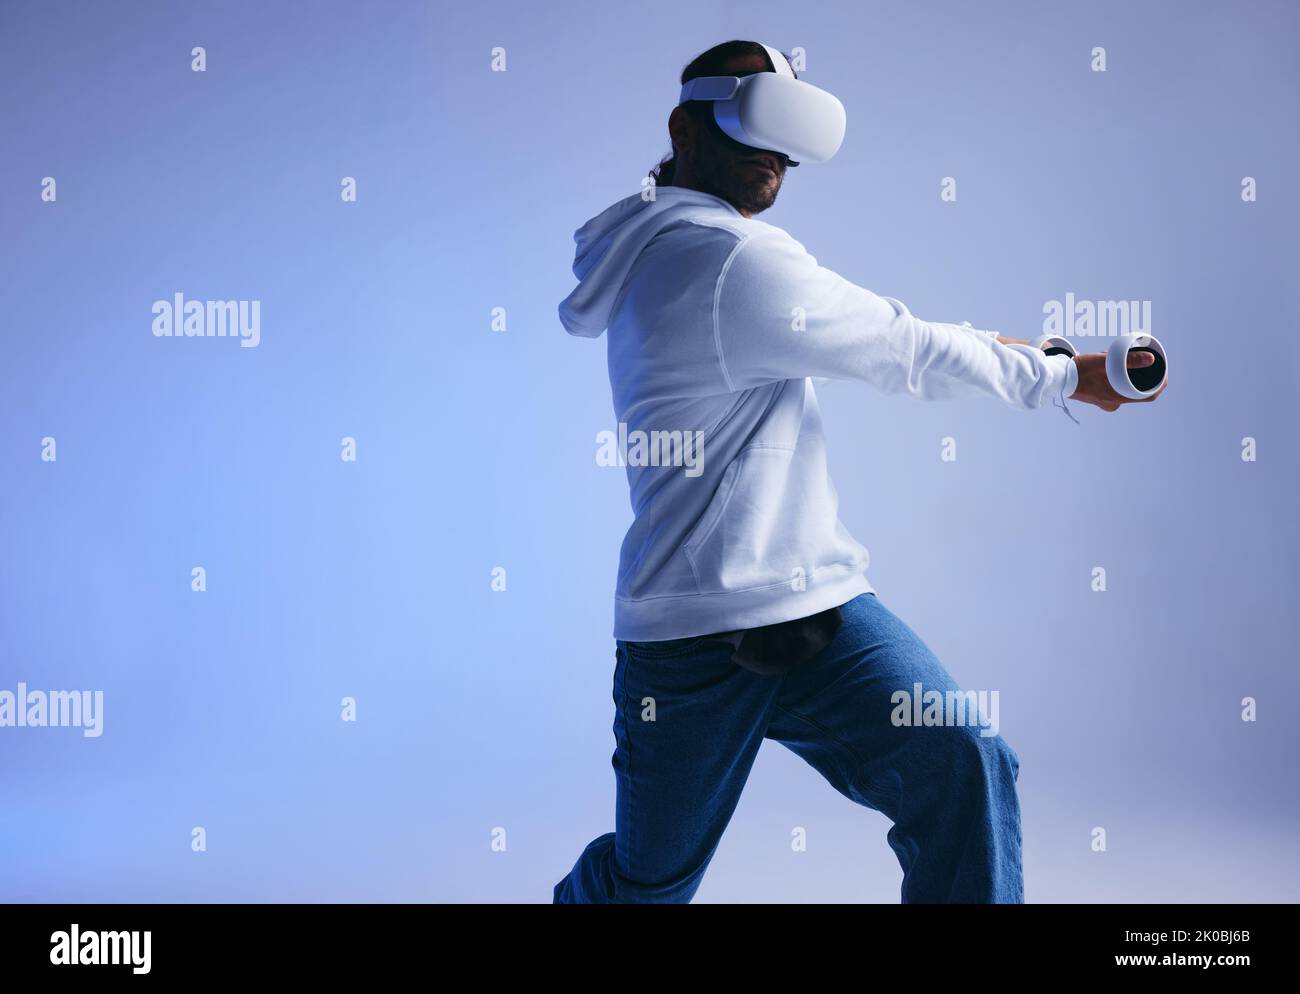 Cricket in virtual reality. Sporty young man batting a virtual ball using gaming controllers. Active young man exploring immersive VR games while wear Stock Photo